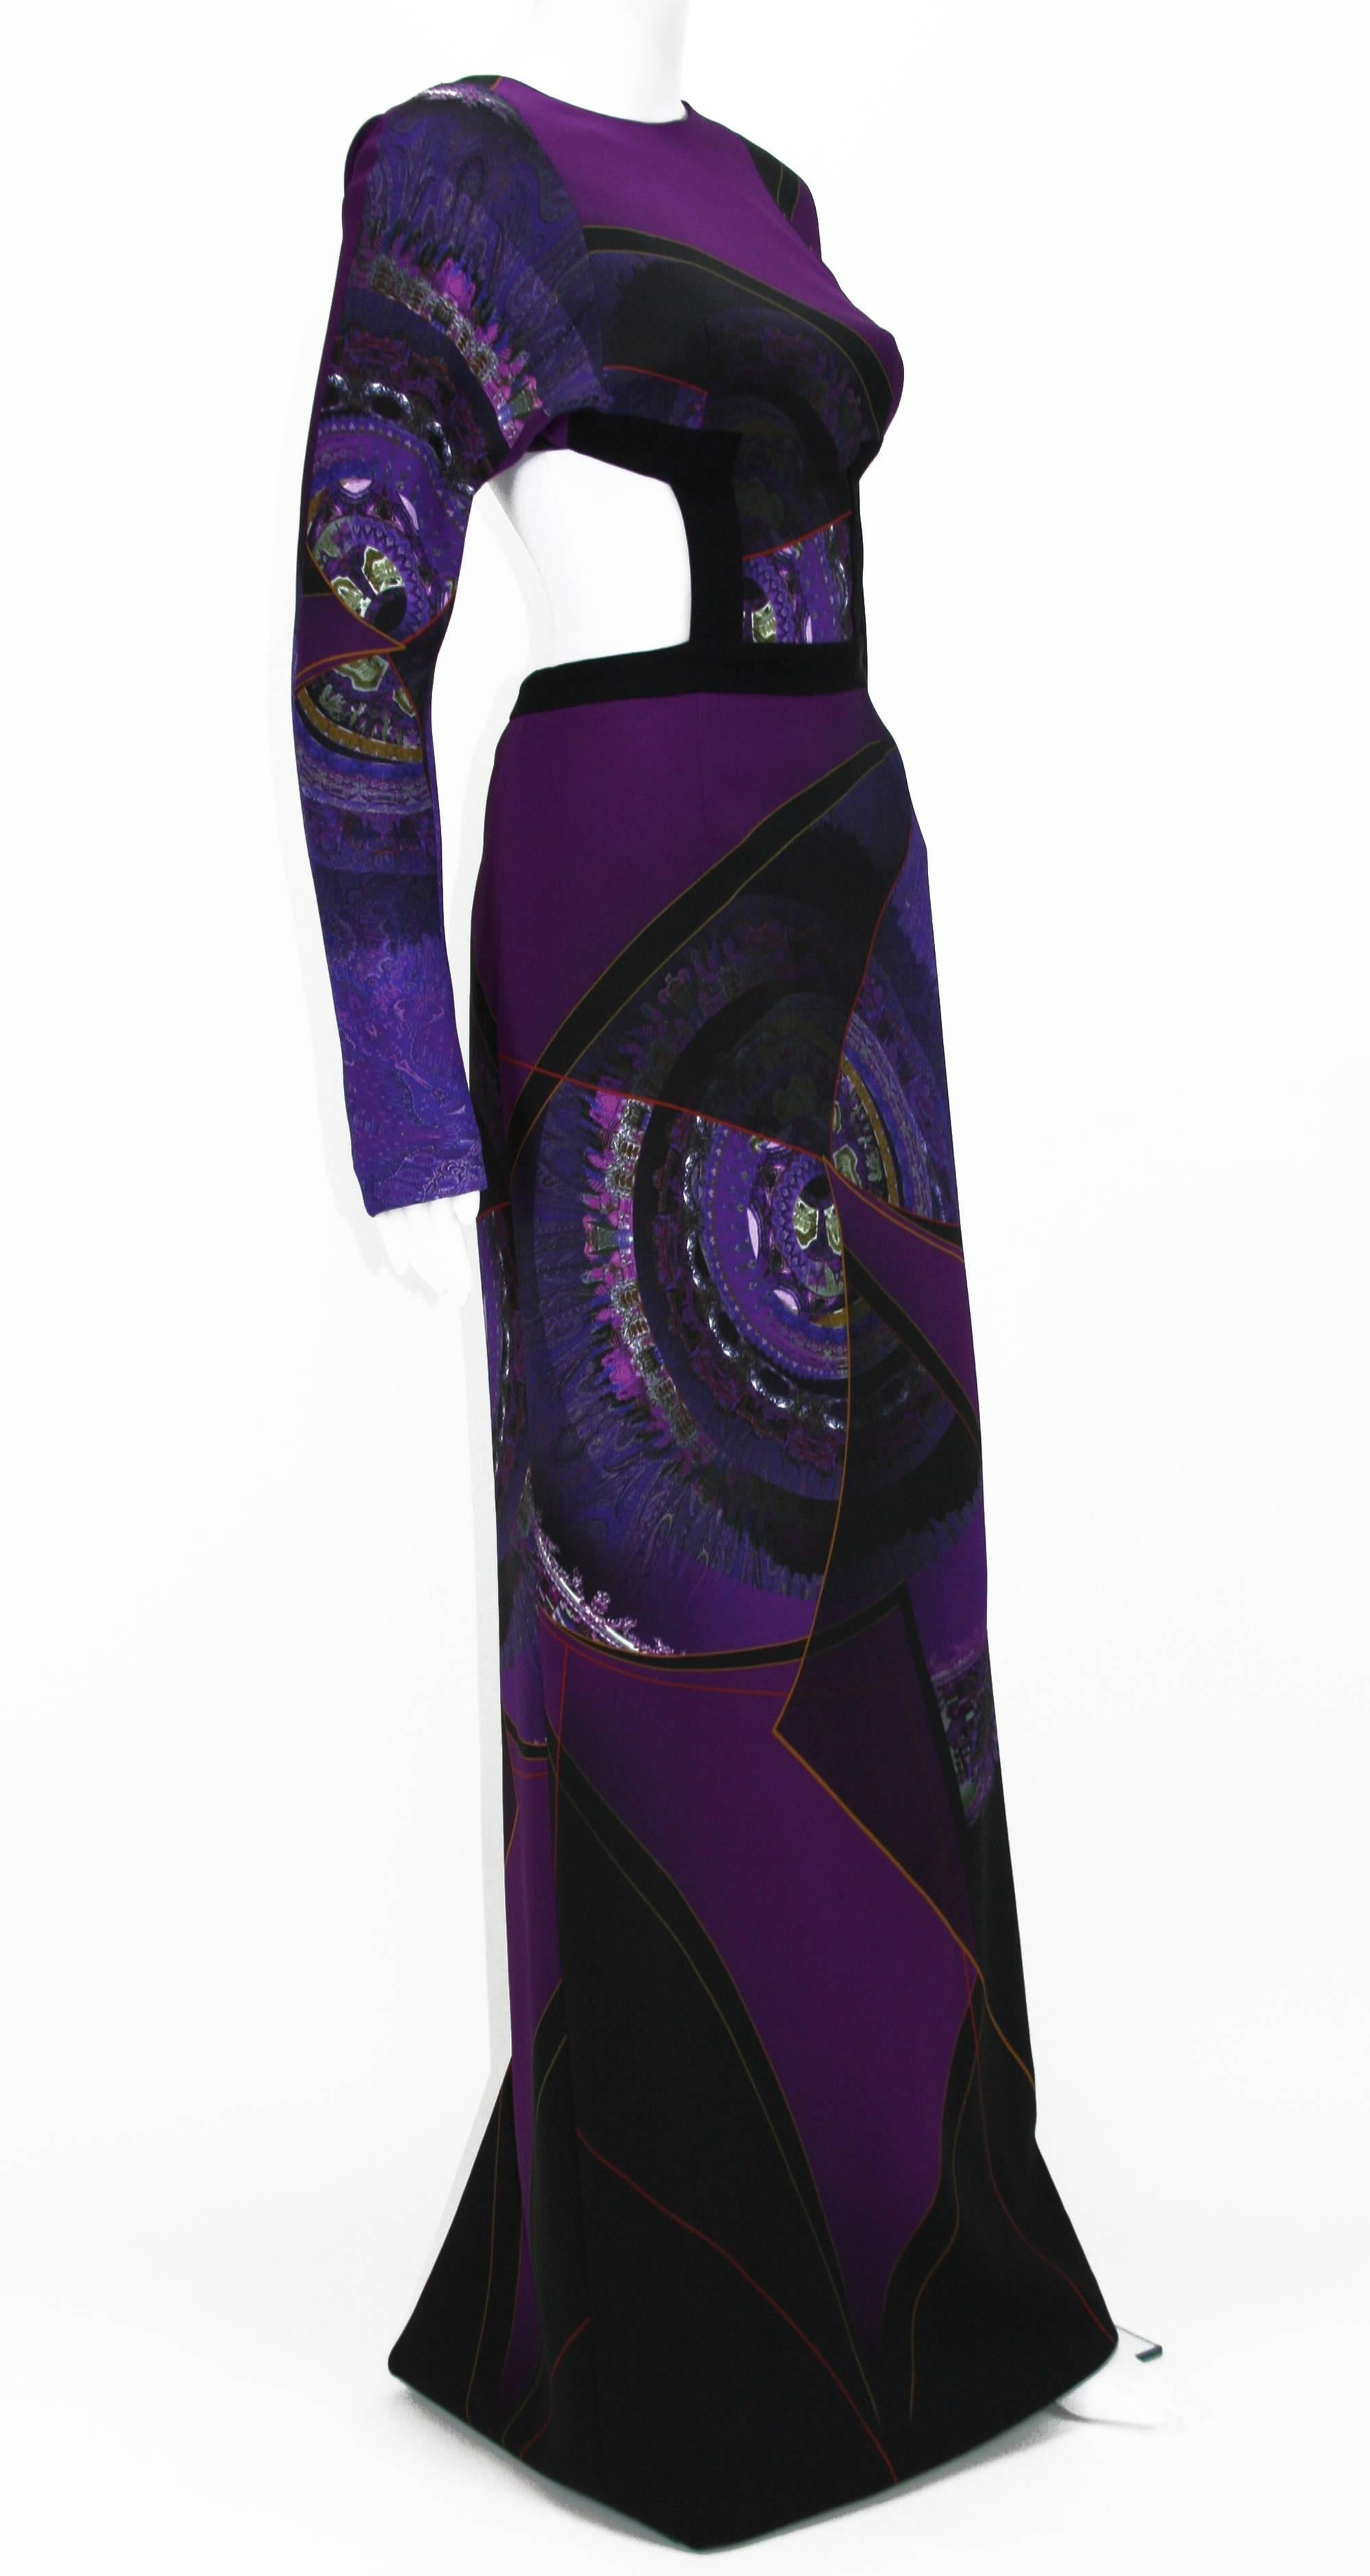 Black New ETRO AD CAMPAIGN RUNWAY Purple Gown CUTOUT Open Back